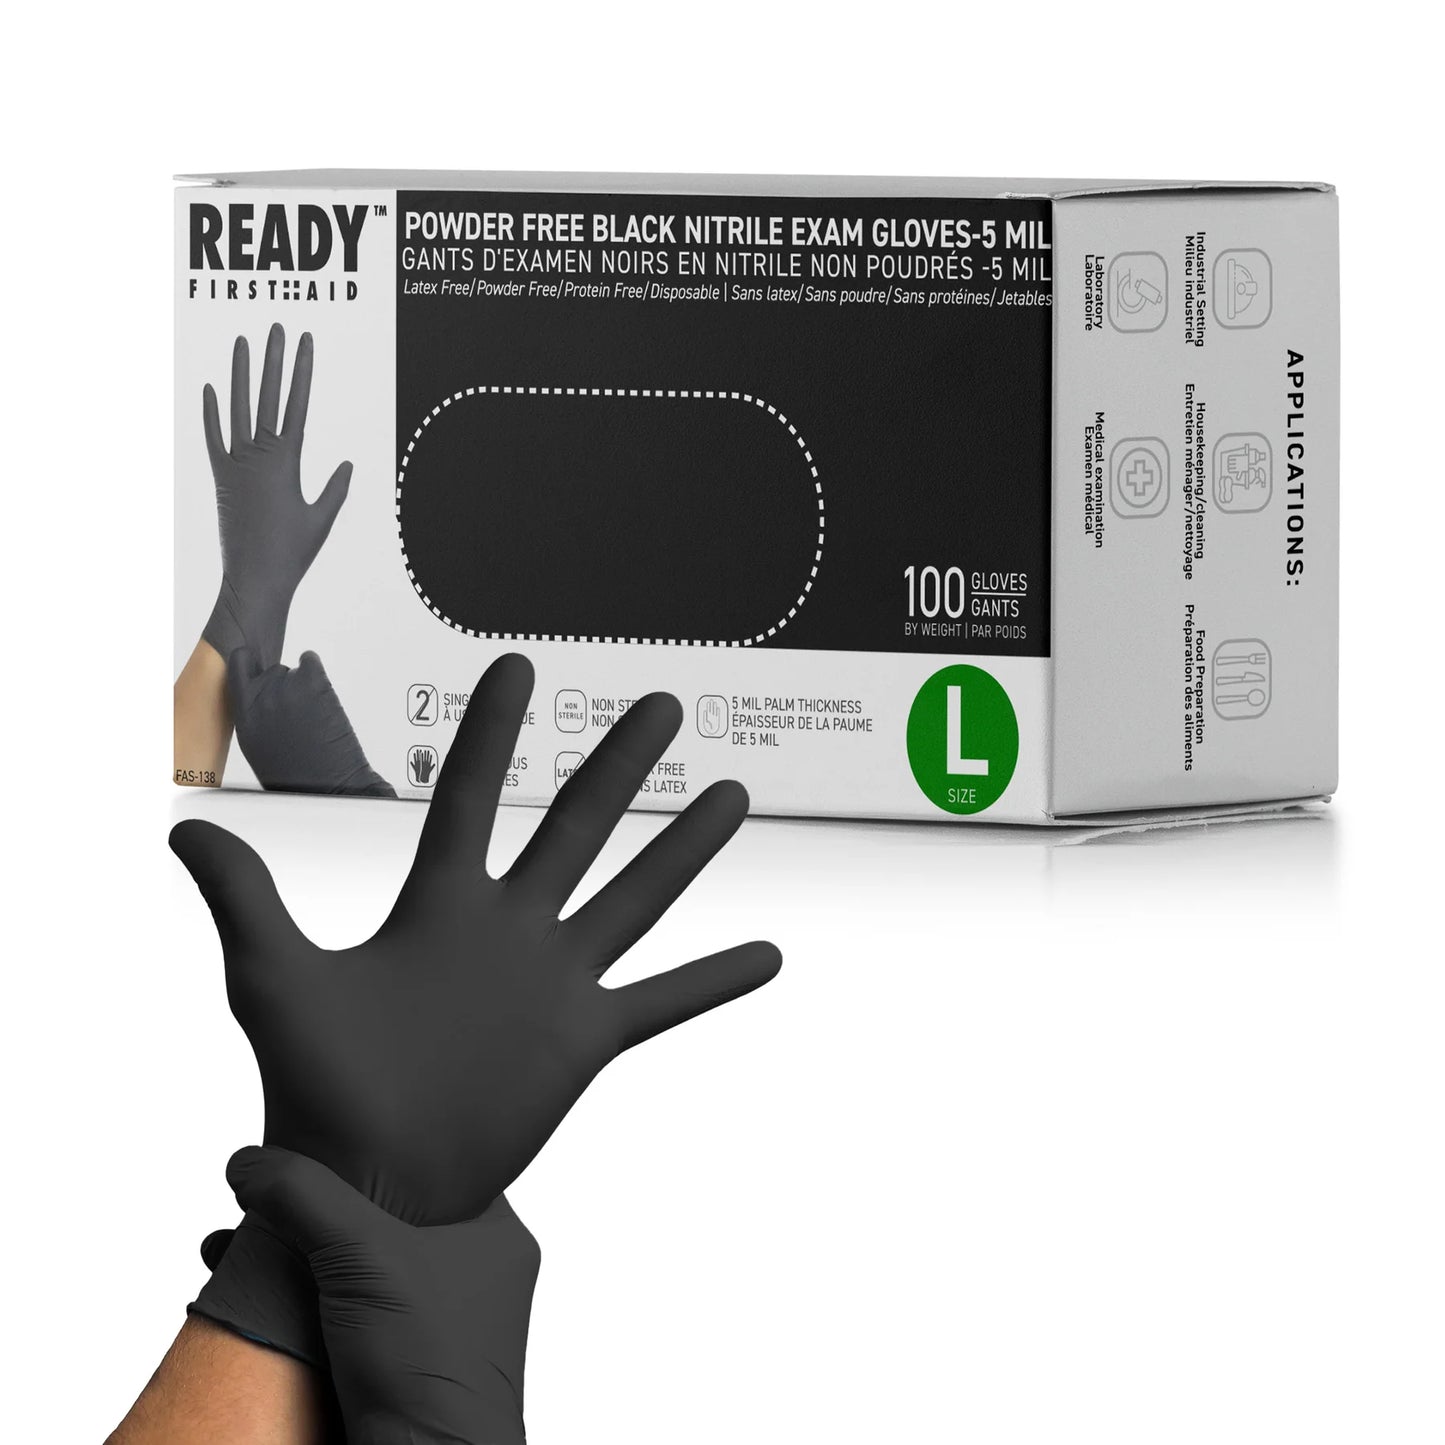 Black Nitrile Gloves (L), Box Of 100 Pieces, 5.0 Mil - Ready First Aid™